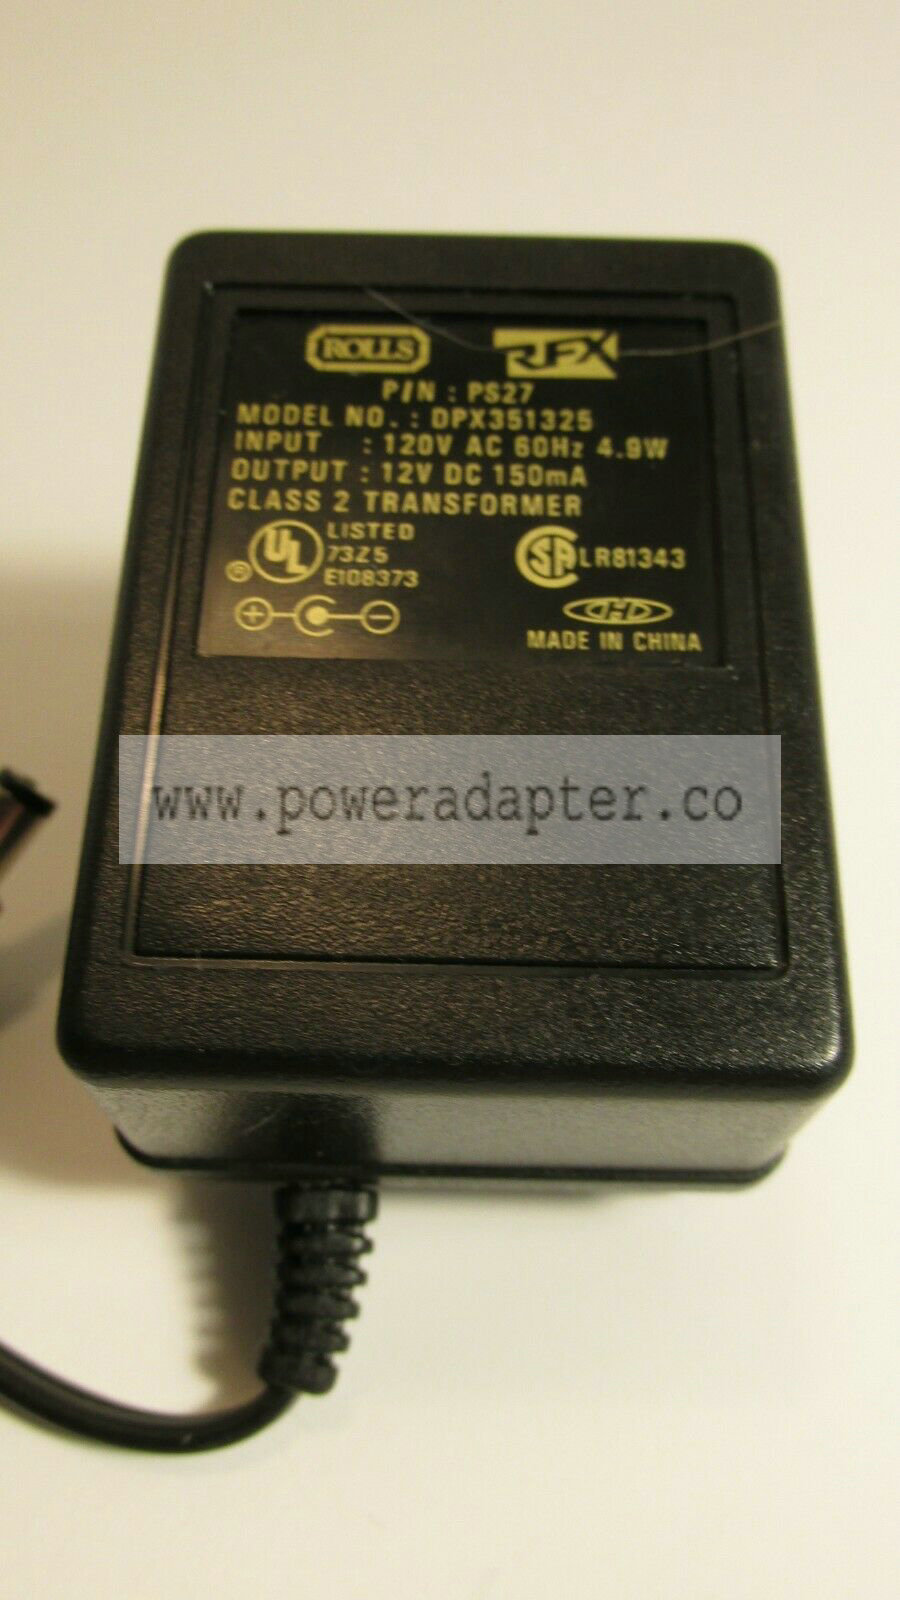 ROLLS RFX Model DPX351325 12V DC 150mA Power Supply Charger Adapter TESTED Brand: Rolls Model: DPX351325 Custom Bu